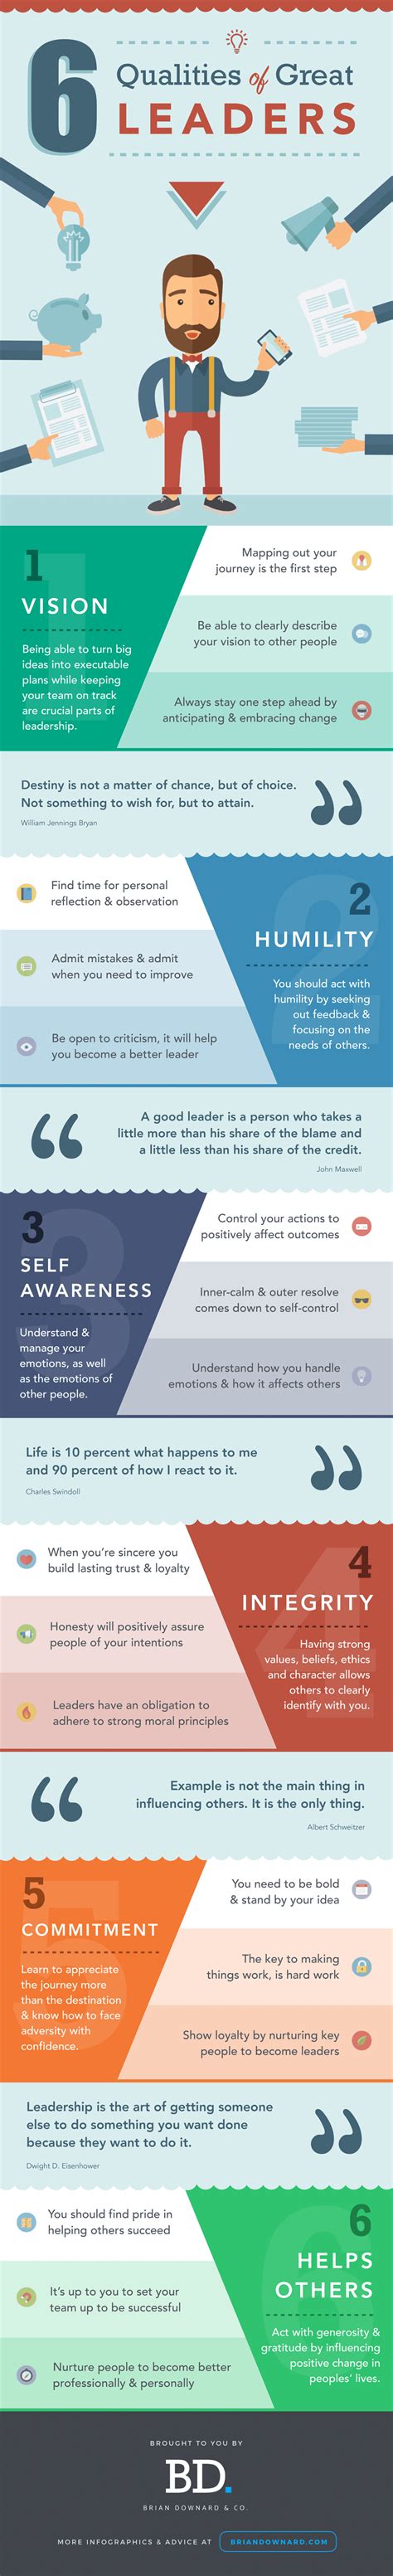 What are the good leadership qualities and how to work on them? Infographic: 6 Qualities of Great Leaders | Refresh Leadership